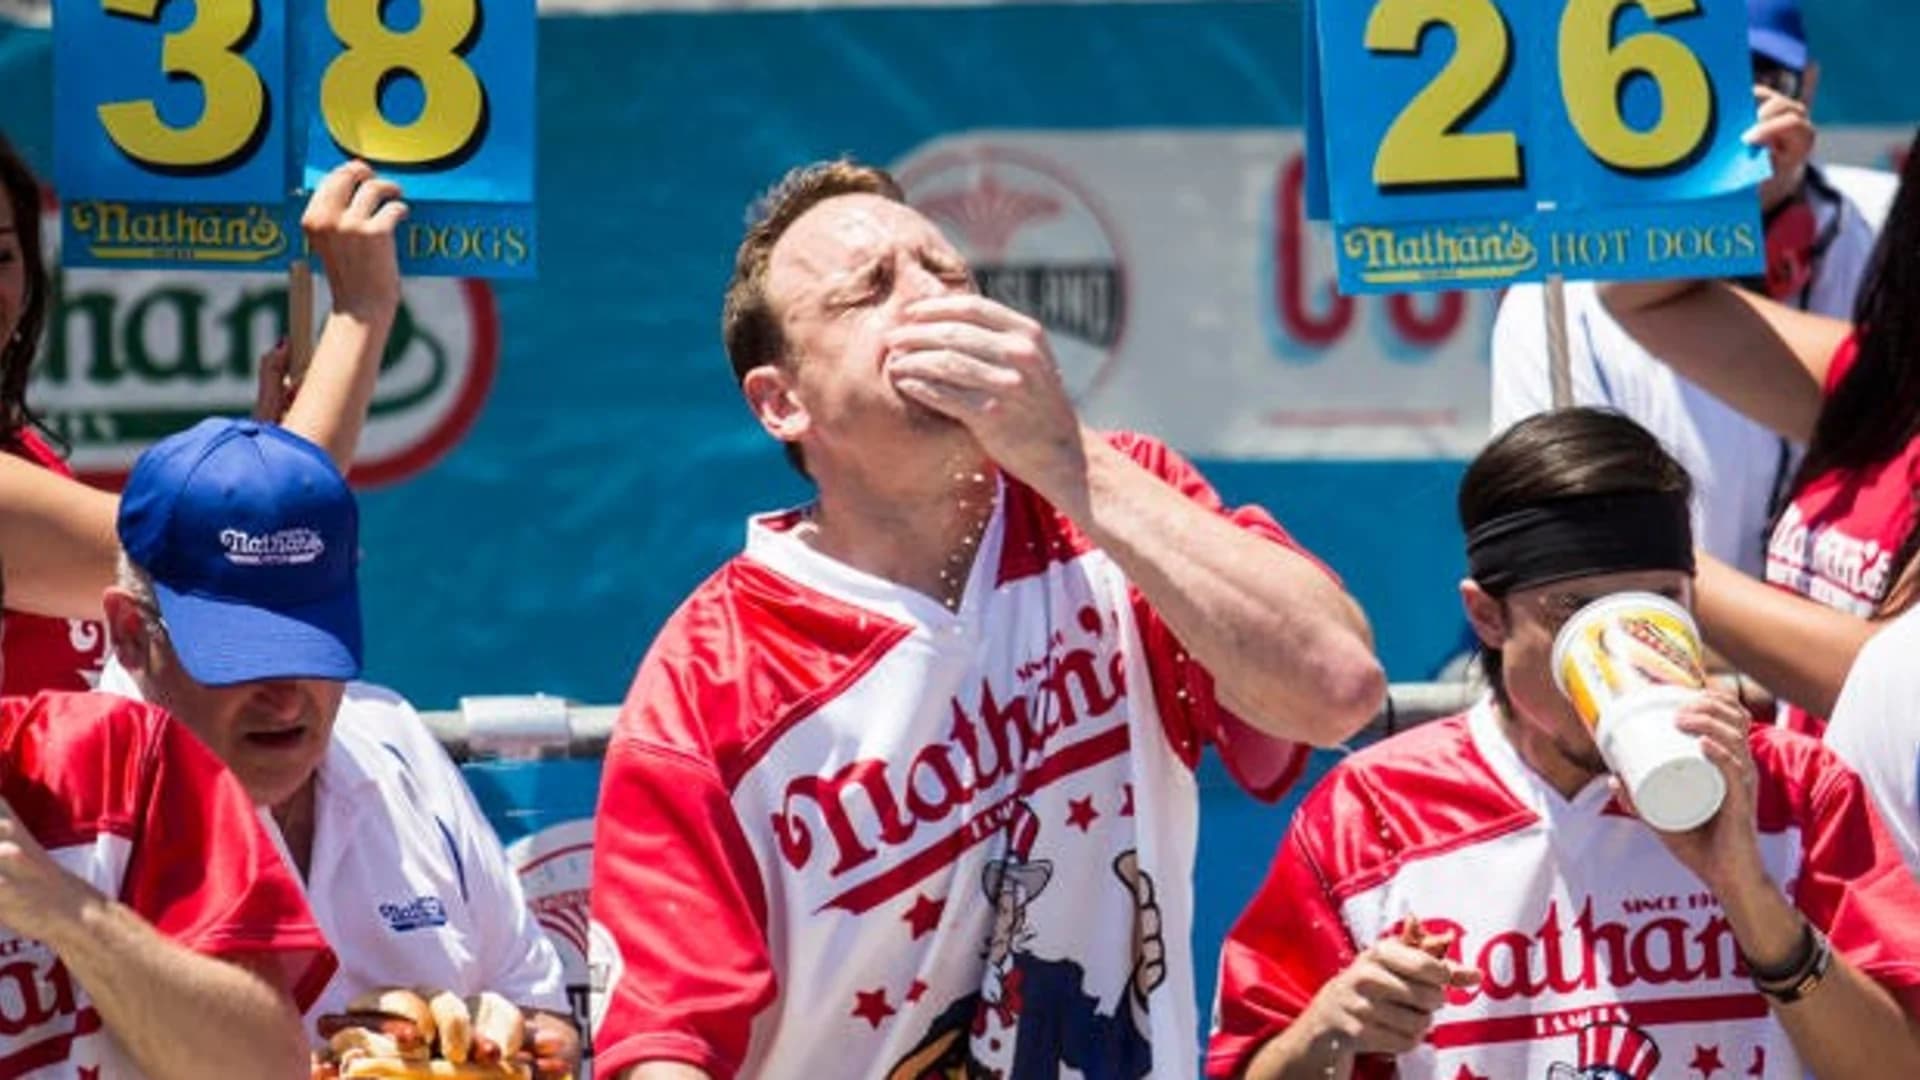 Defending champ Joey Chestnut sets record with 74 hot dogs